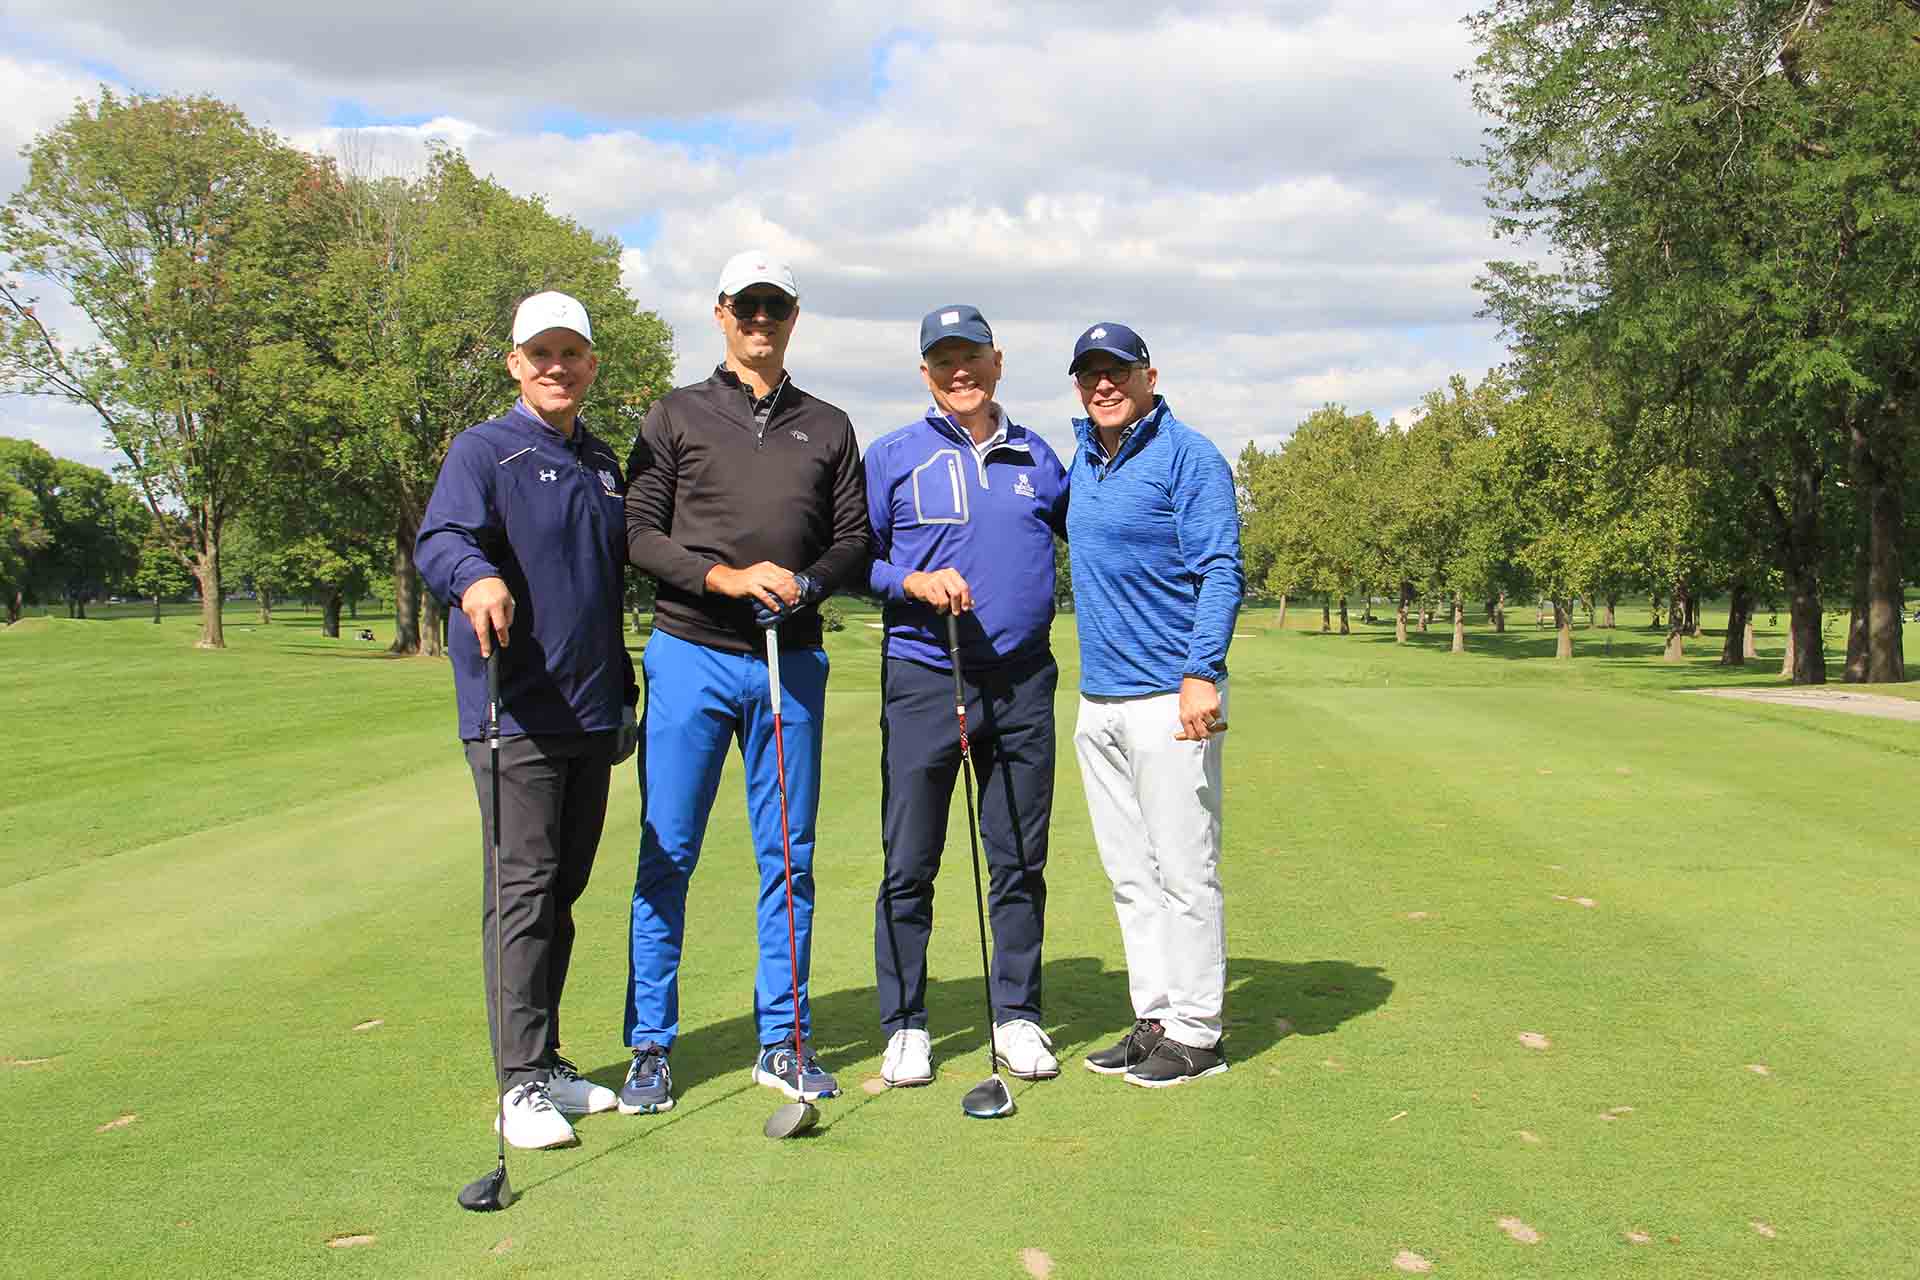 2022-Endowment-Golf-Classic-four-people-pose-on-golf-course